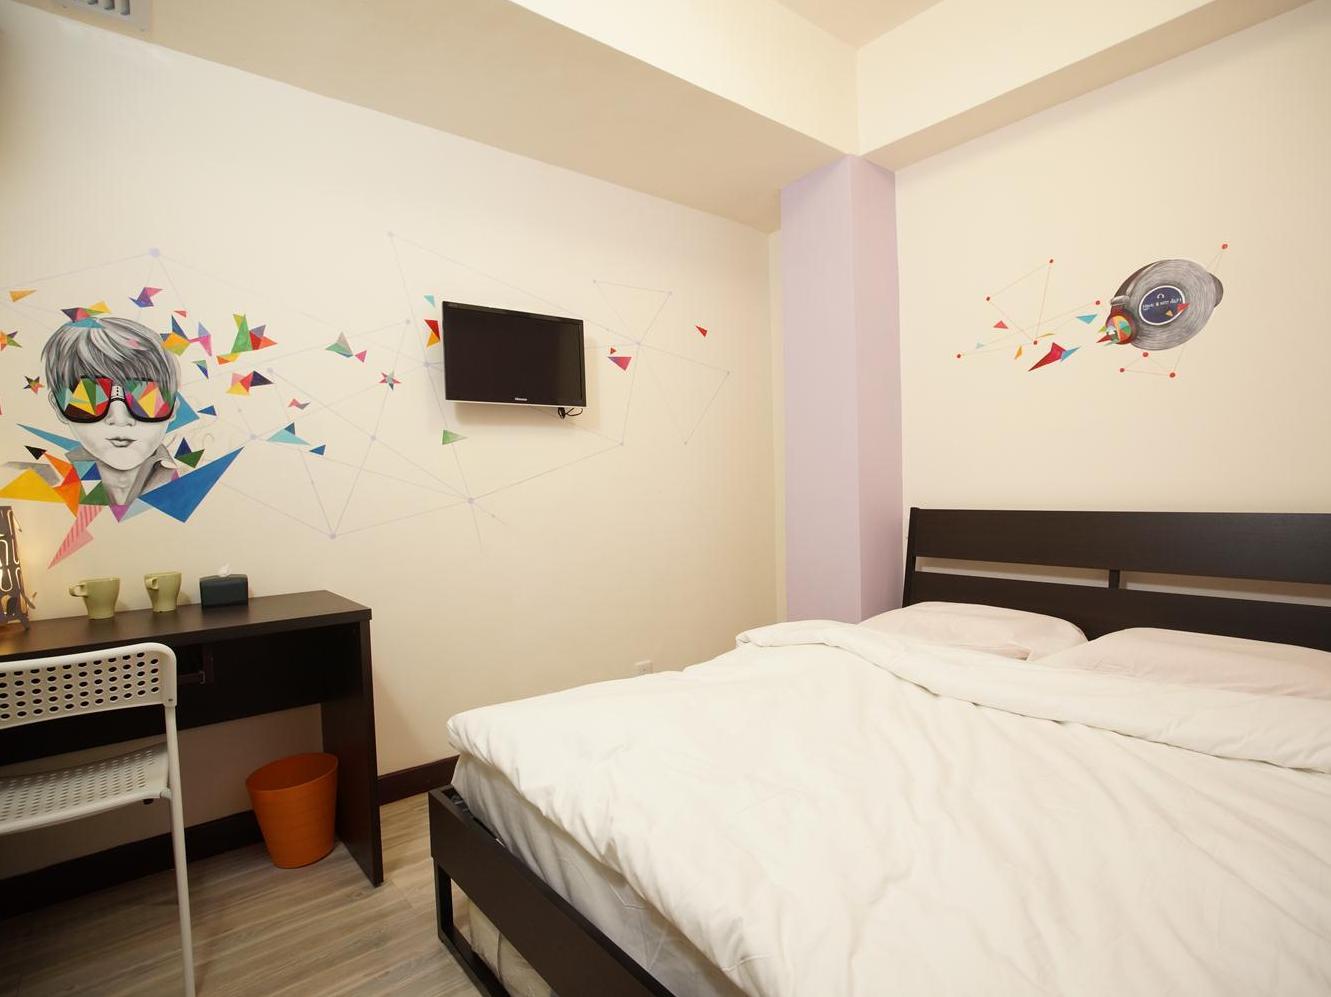 Alohas Hong Kong Hostel Hong Kong FAQ 2016, What facilities are there in Alohas Hong Kong Hostel Hong Kong 2016, What Languages Spoken are Supported in Alohas Hong Kong Hostel Hong Kong 2016, Which payment cards are accepted in Alohas Hong Kong Hostel Hong Kong , Hong Kong Alohas Hong Kong Hostel room facilities and services Q&A 2016, Hong Kong Alohas Hong Kong Hostel online booking services 2016, Hong Kong Alohas Hong Kong Hostel address 2016, Hong Kong Alohas Hong Kong Hostel telephone number 2016,Hong Kong Alohas Hong Kong Hostel map 2016, Hong Kong Alohas Hong Kong Hostel traffic guide 2016, how to go Hong Kong Alohas Hong Kong Hostel, Hong Kong Alohas Hong Kong Hostel booking online 2016, Hong Kong Alohas Hong Kong Hostel room types 2016.